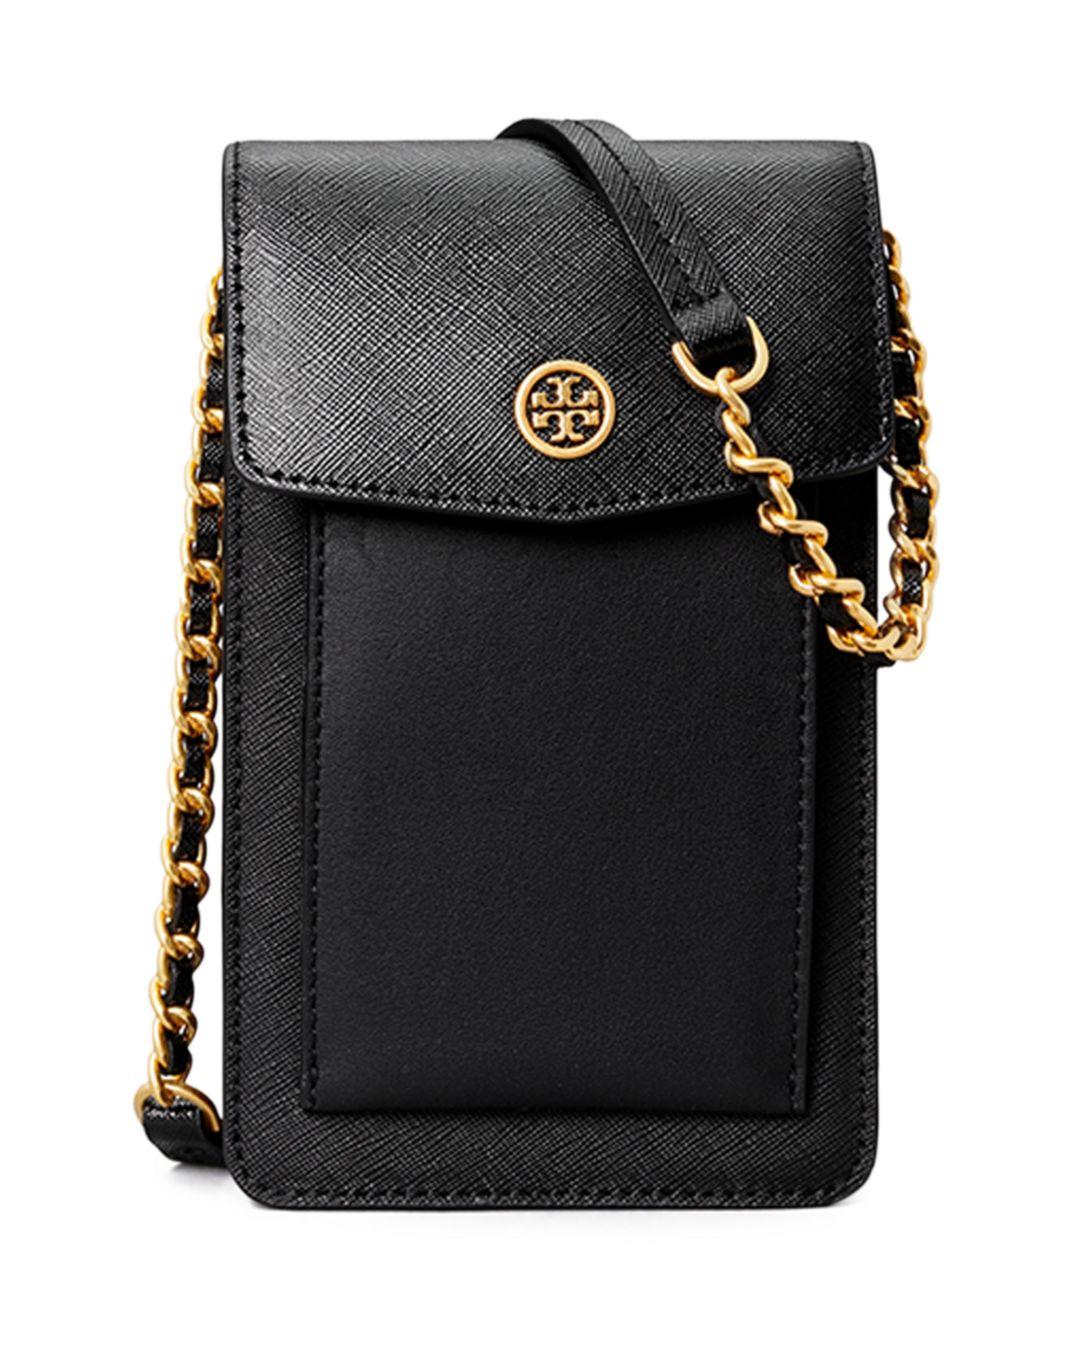 Tory Burch Leather Robinson Mixed-materials Phone Crossbody in Black - Lyst